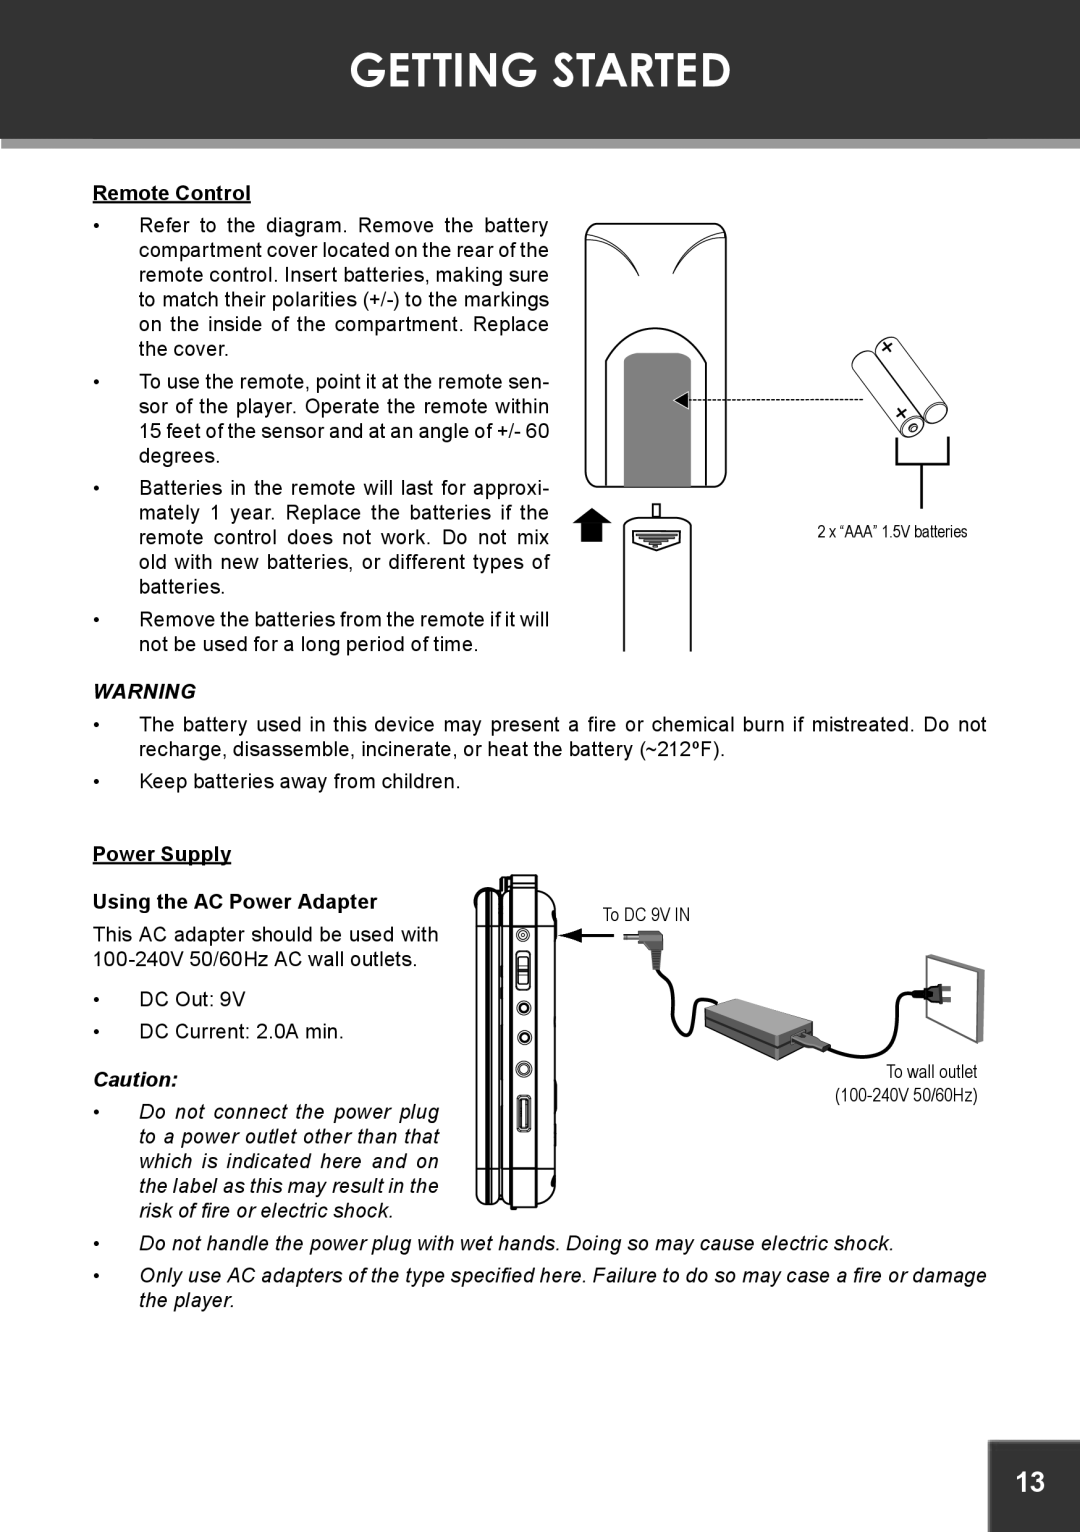 COBY electronic TF-DVD7380 instruction manual Getting Started, Power Supply Using the AC Power Adapter, Remote Control 